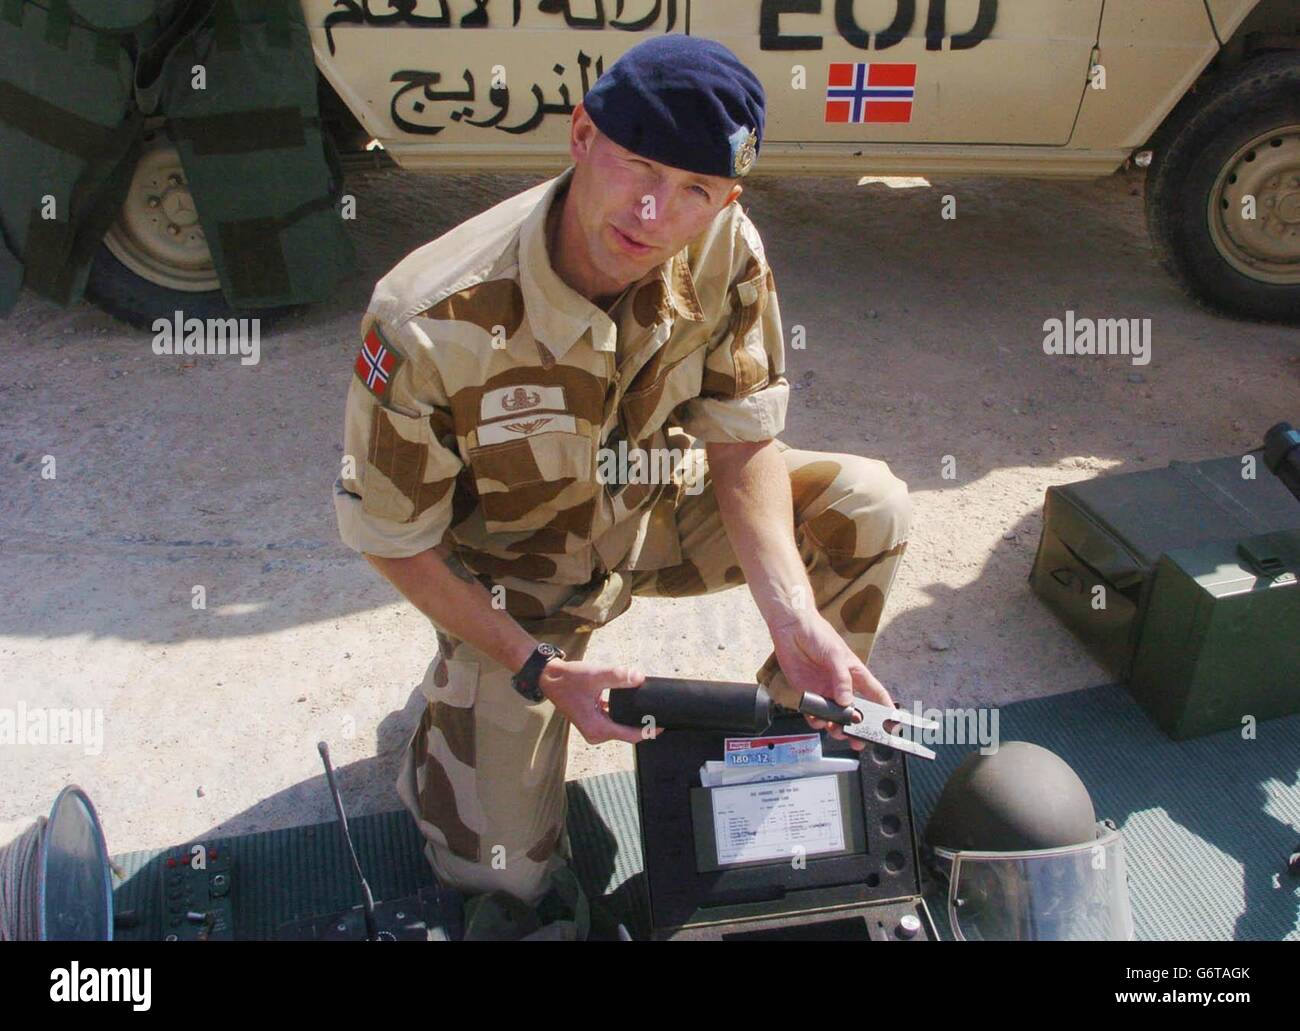 Commander Malkenes, a Commanding Officer for the Norwegian Explosive Ordnance Disposal (EOB) team and part of the Norwegian Engineers Squadron based in Bergen in Norway, describes a tool used to remove fuses in bombs at an Improvised Explosive Devices (IED) base near Basra in southern Iraq. Stock Photo